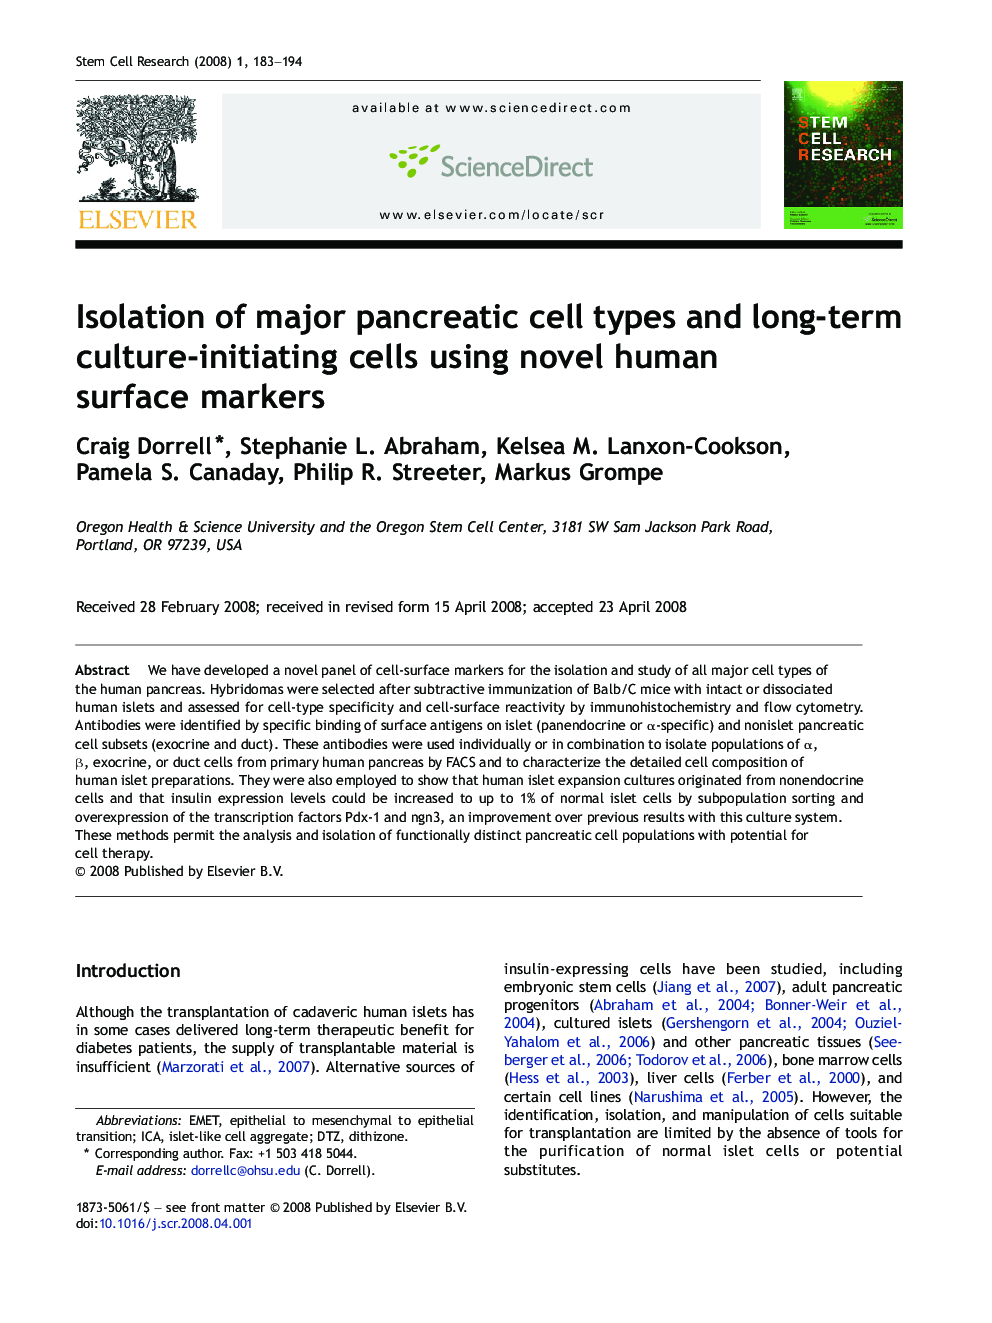 Isolation of major pancreatic cell types and long-term culture-initiating cells using novel human surface markers